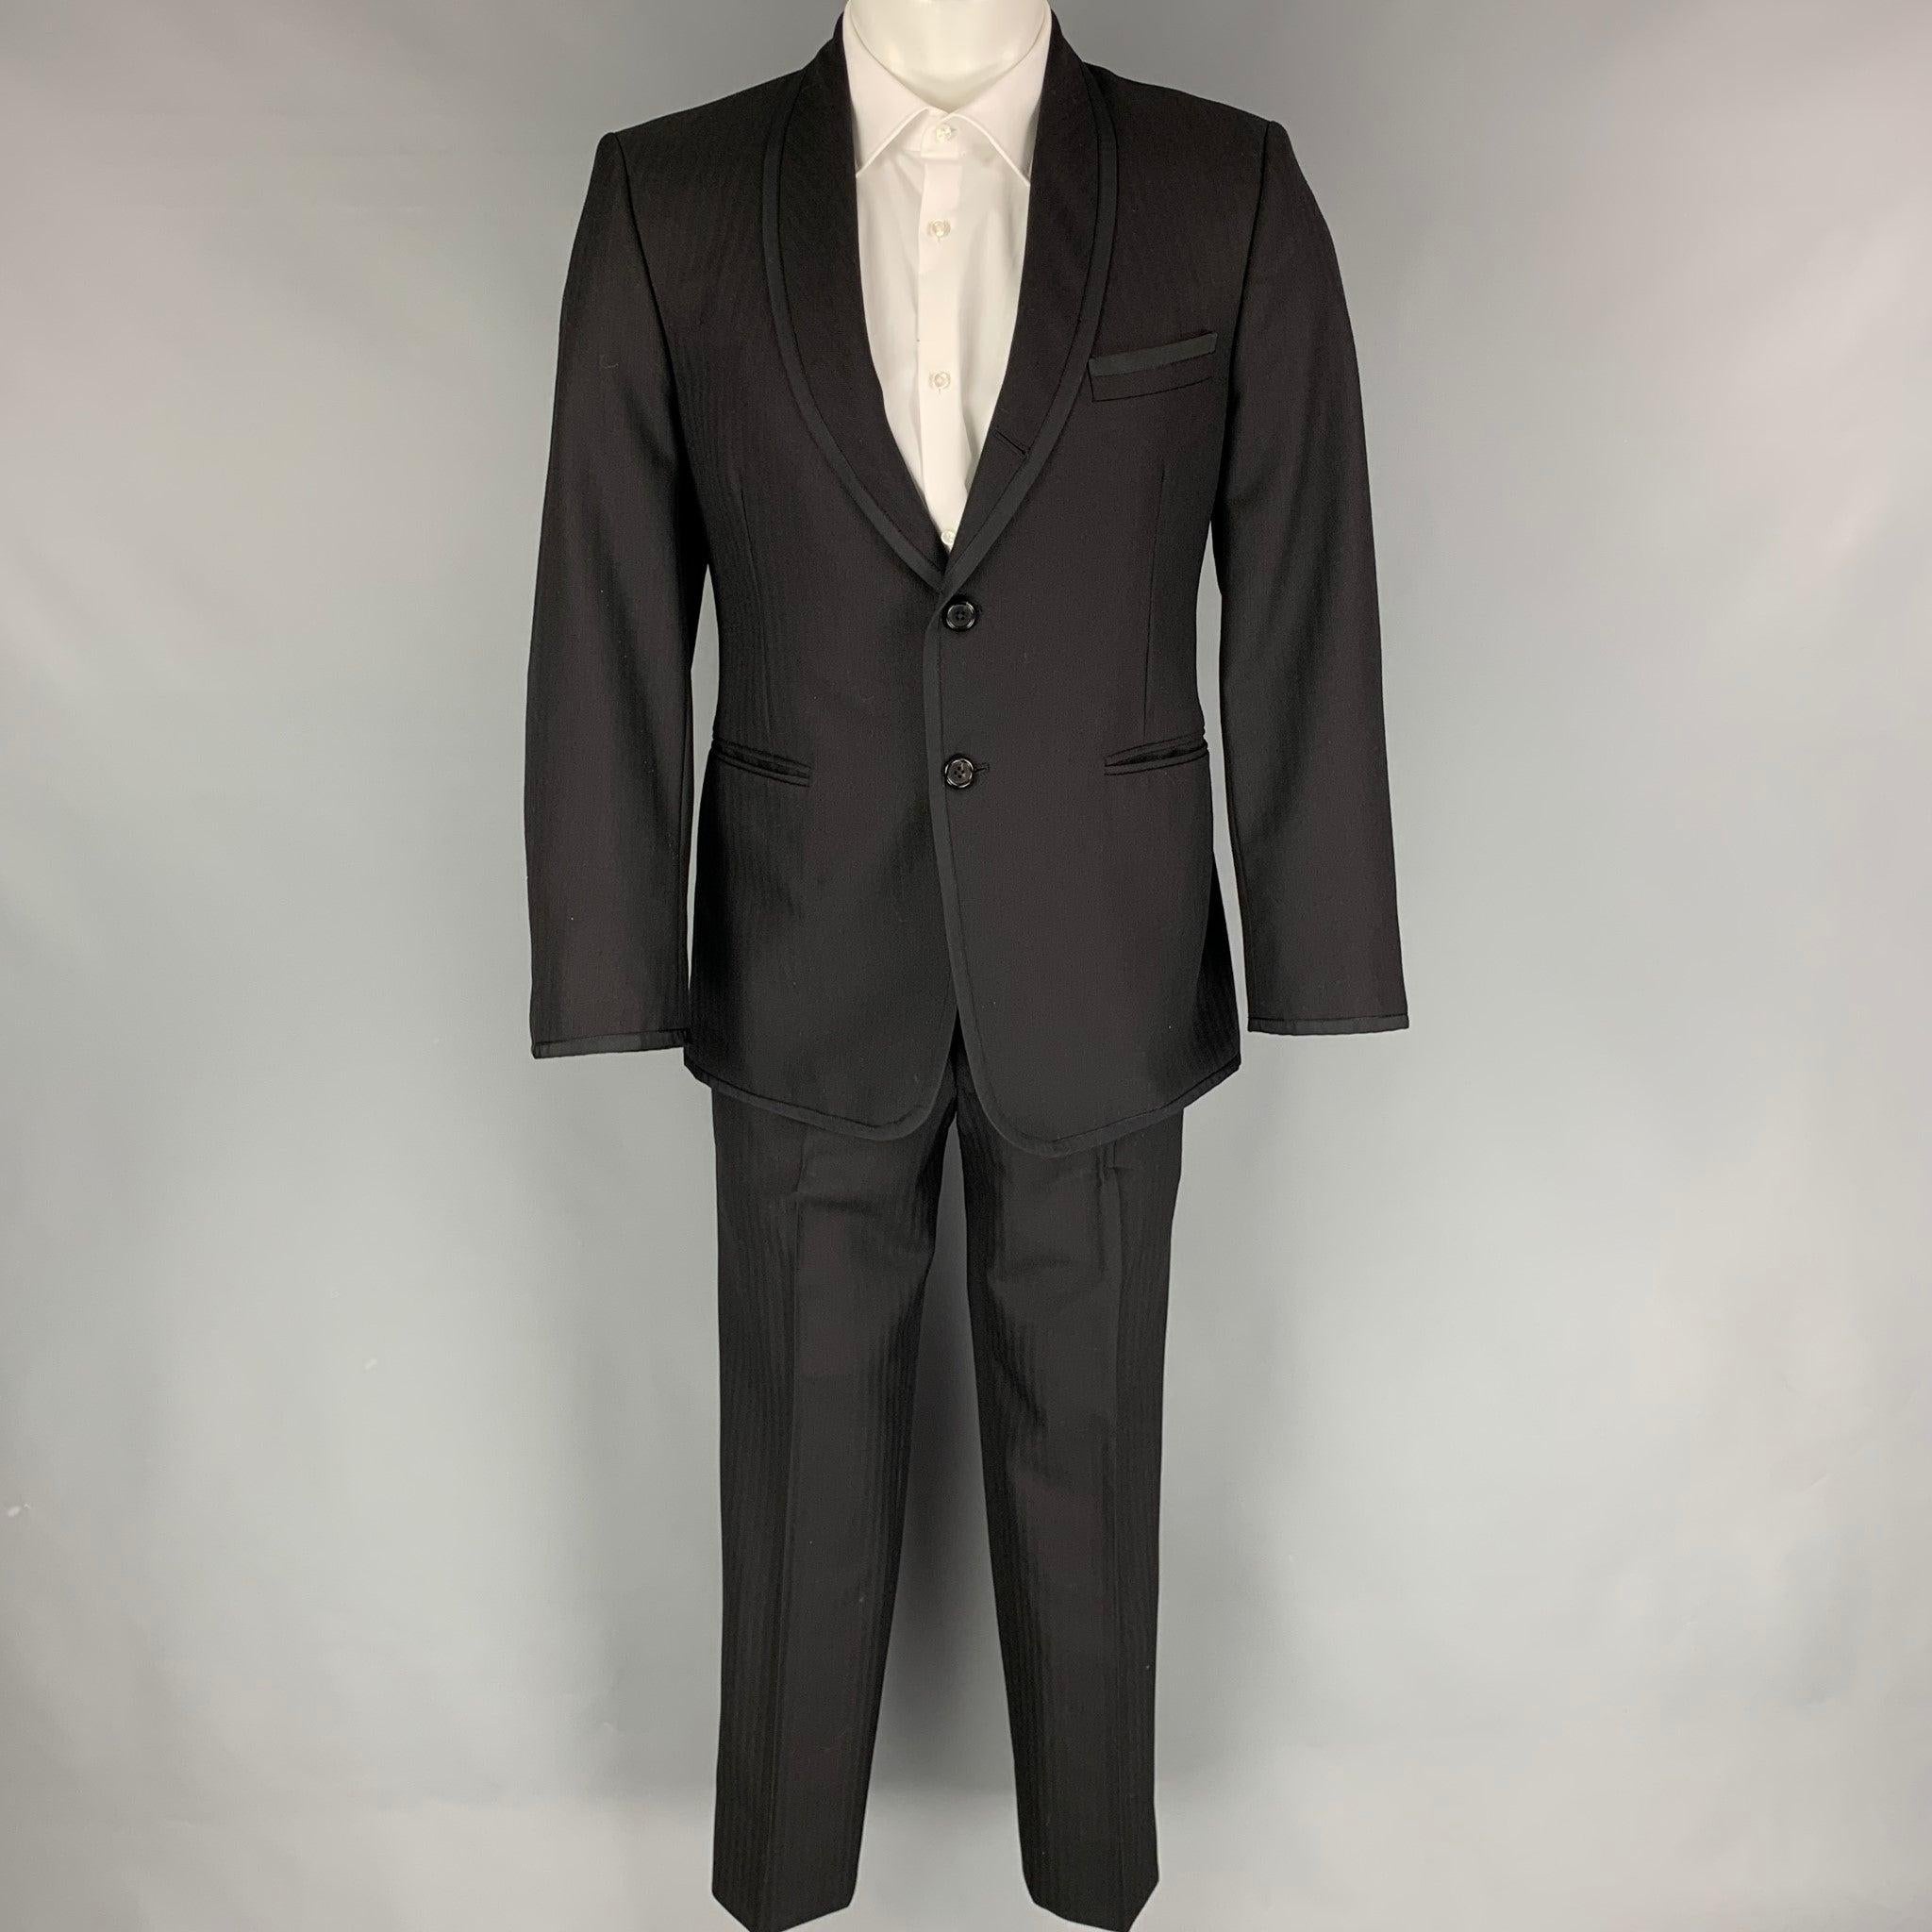 THOM BROWNE for NEIMAN MARCUS tuxedo
suit comes in a black on black herringbone material with a full liner and includes a single breasted, three button sport coat with a shawl lapel and matching pleated front trousers. Handmade in USA.Excellent